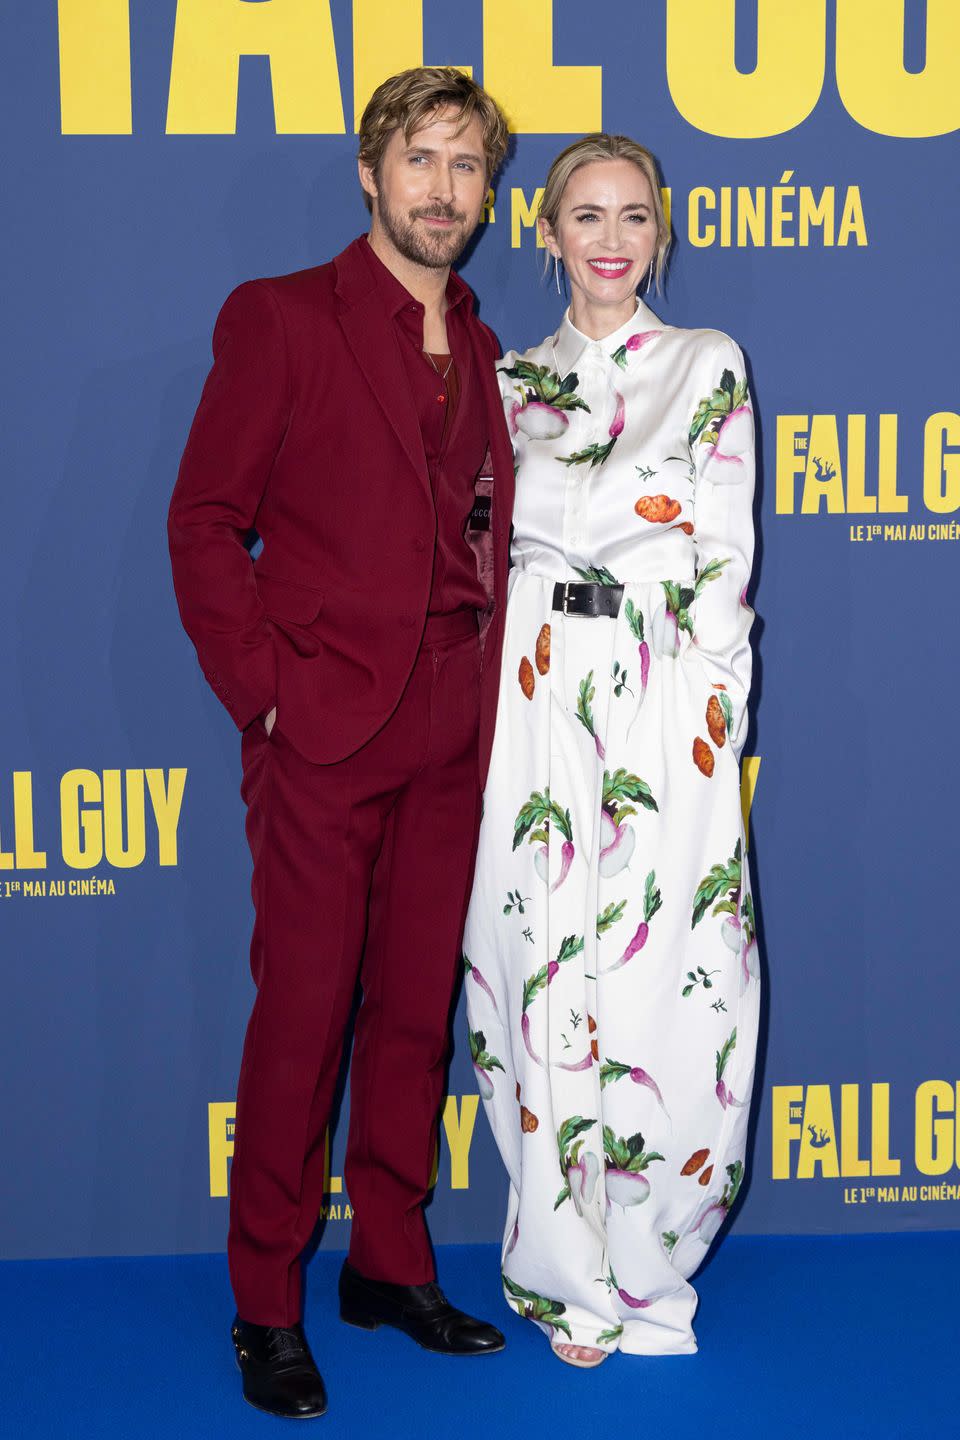 paris, france april 23 ryan gosling and emily blunt attend the the fall guy premiere at ugc normandie on april 23, 2024 in paris, france photo by stephane cardinale corbiscorbis via getty images